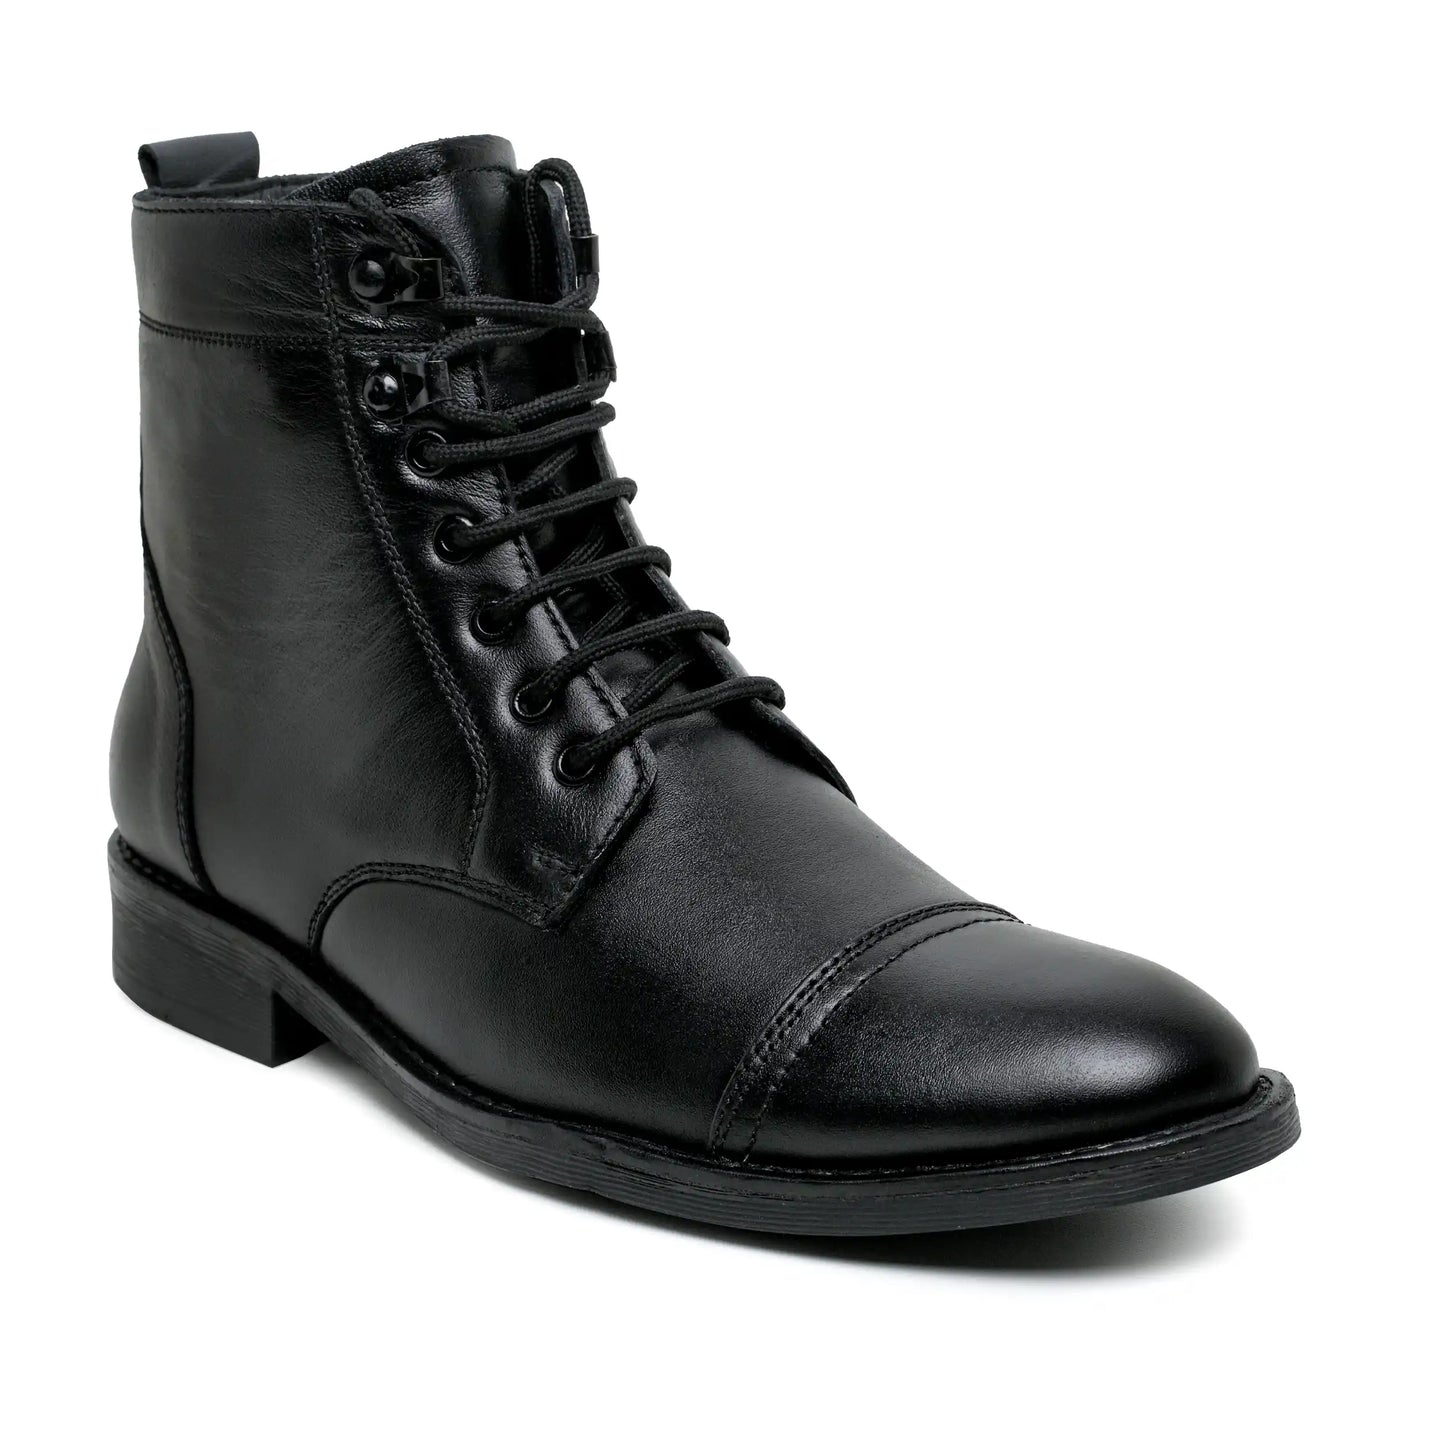 Genuine Leather High Neck Boots Ankle Shoes